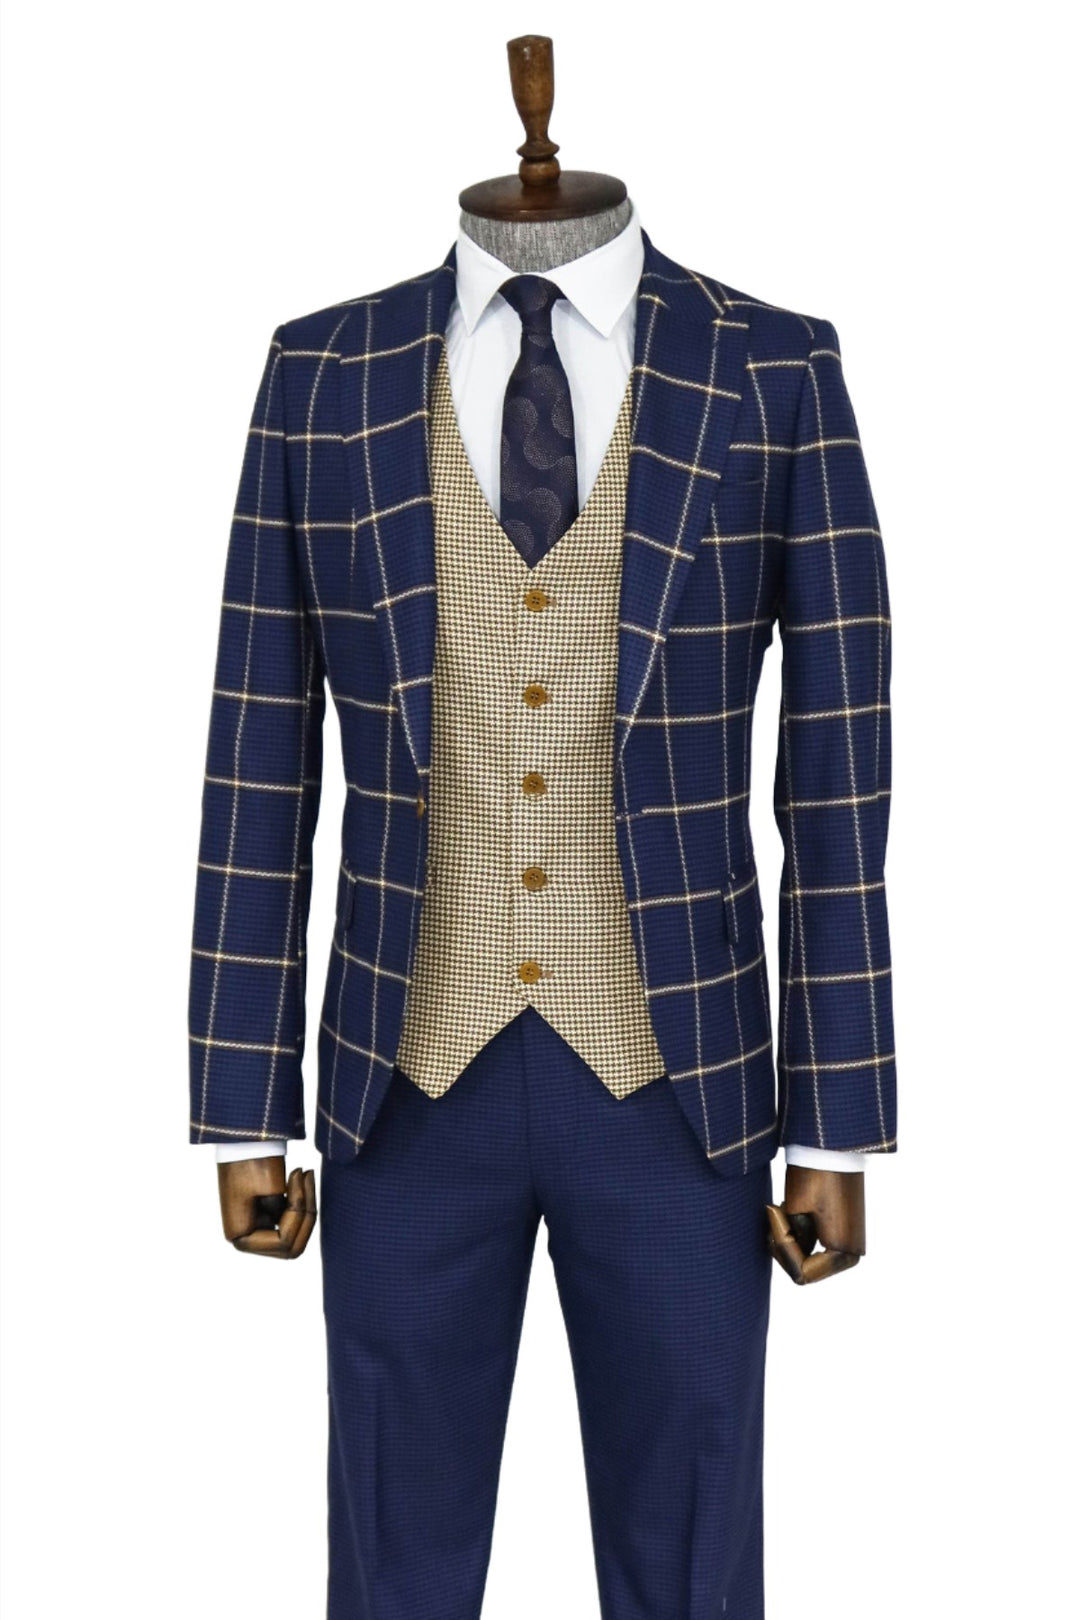 Checked Patterned Slim Fit Navy Blue Men Suit - Wessi